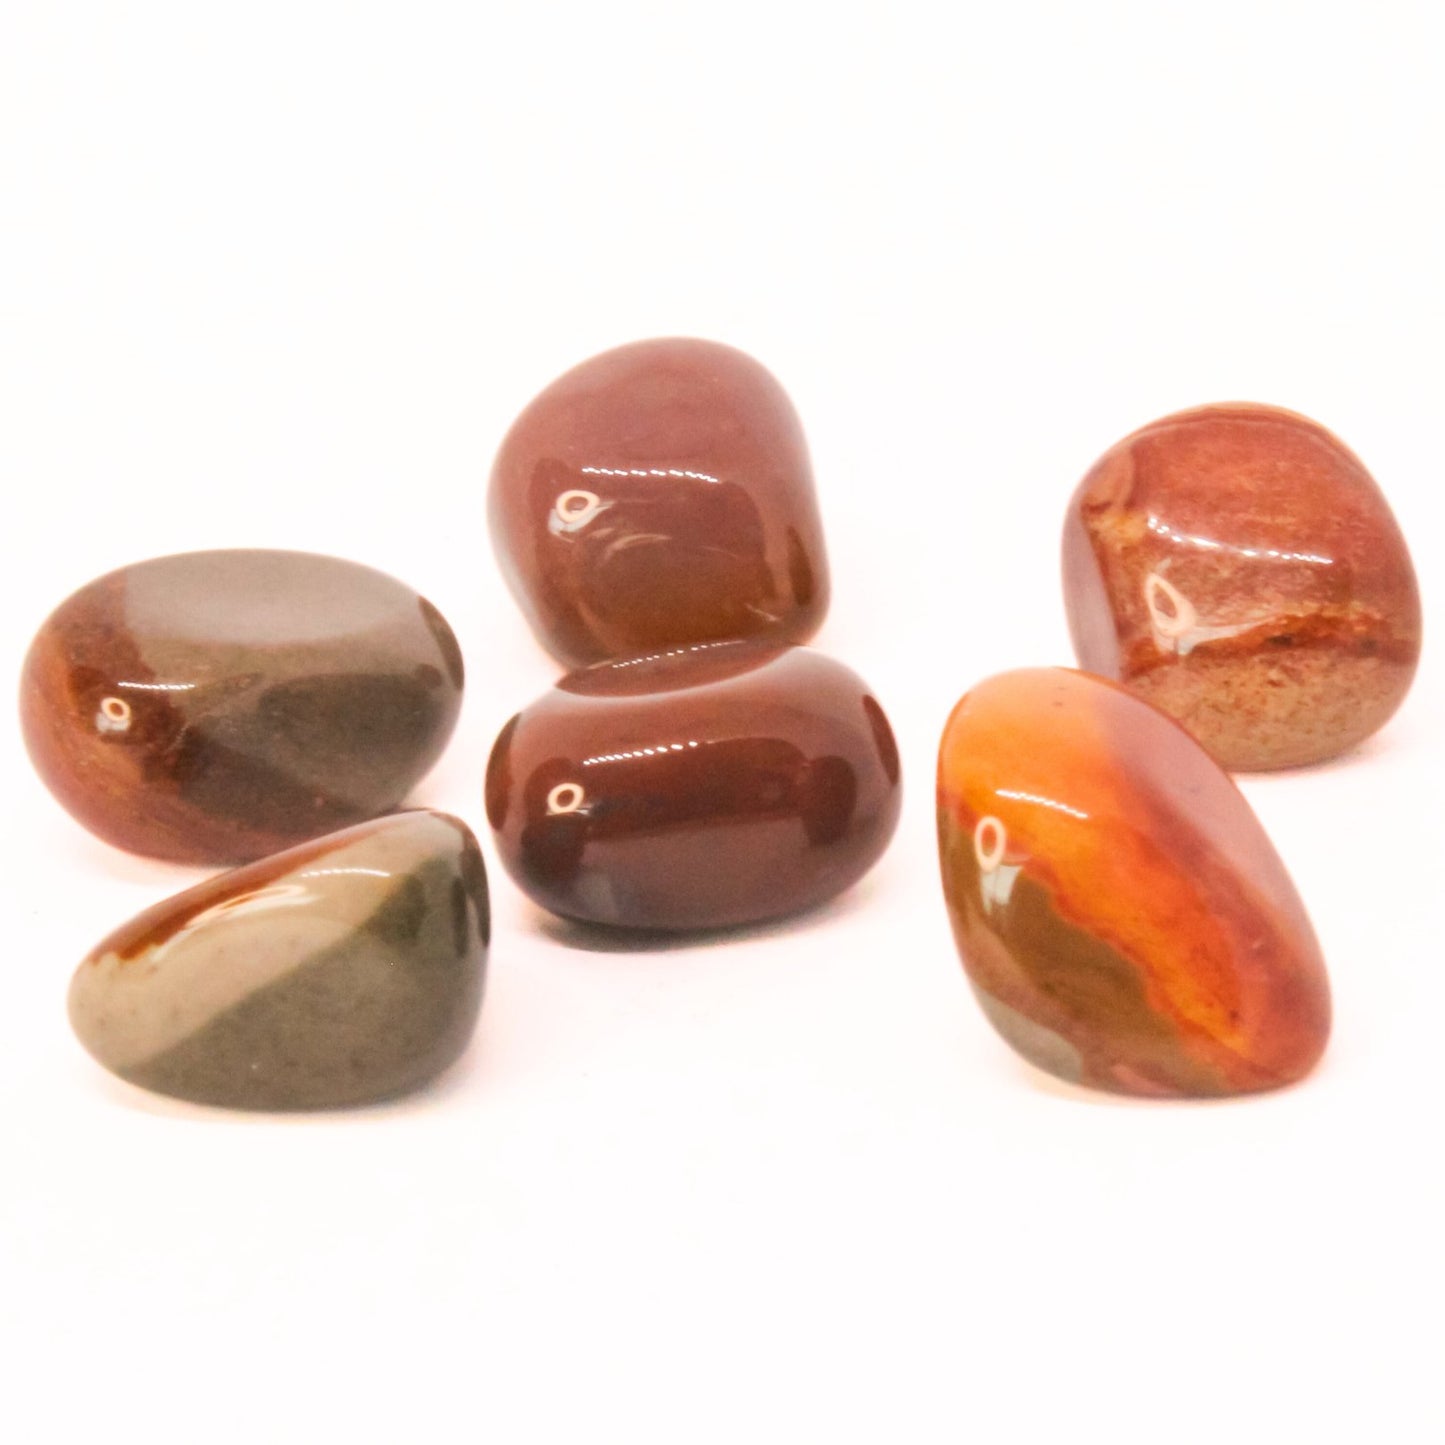 Mookaite Tumble - Conscious Crystals New Zealand Crystal and Spiritual Shop